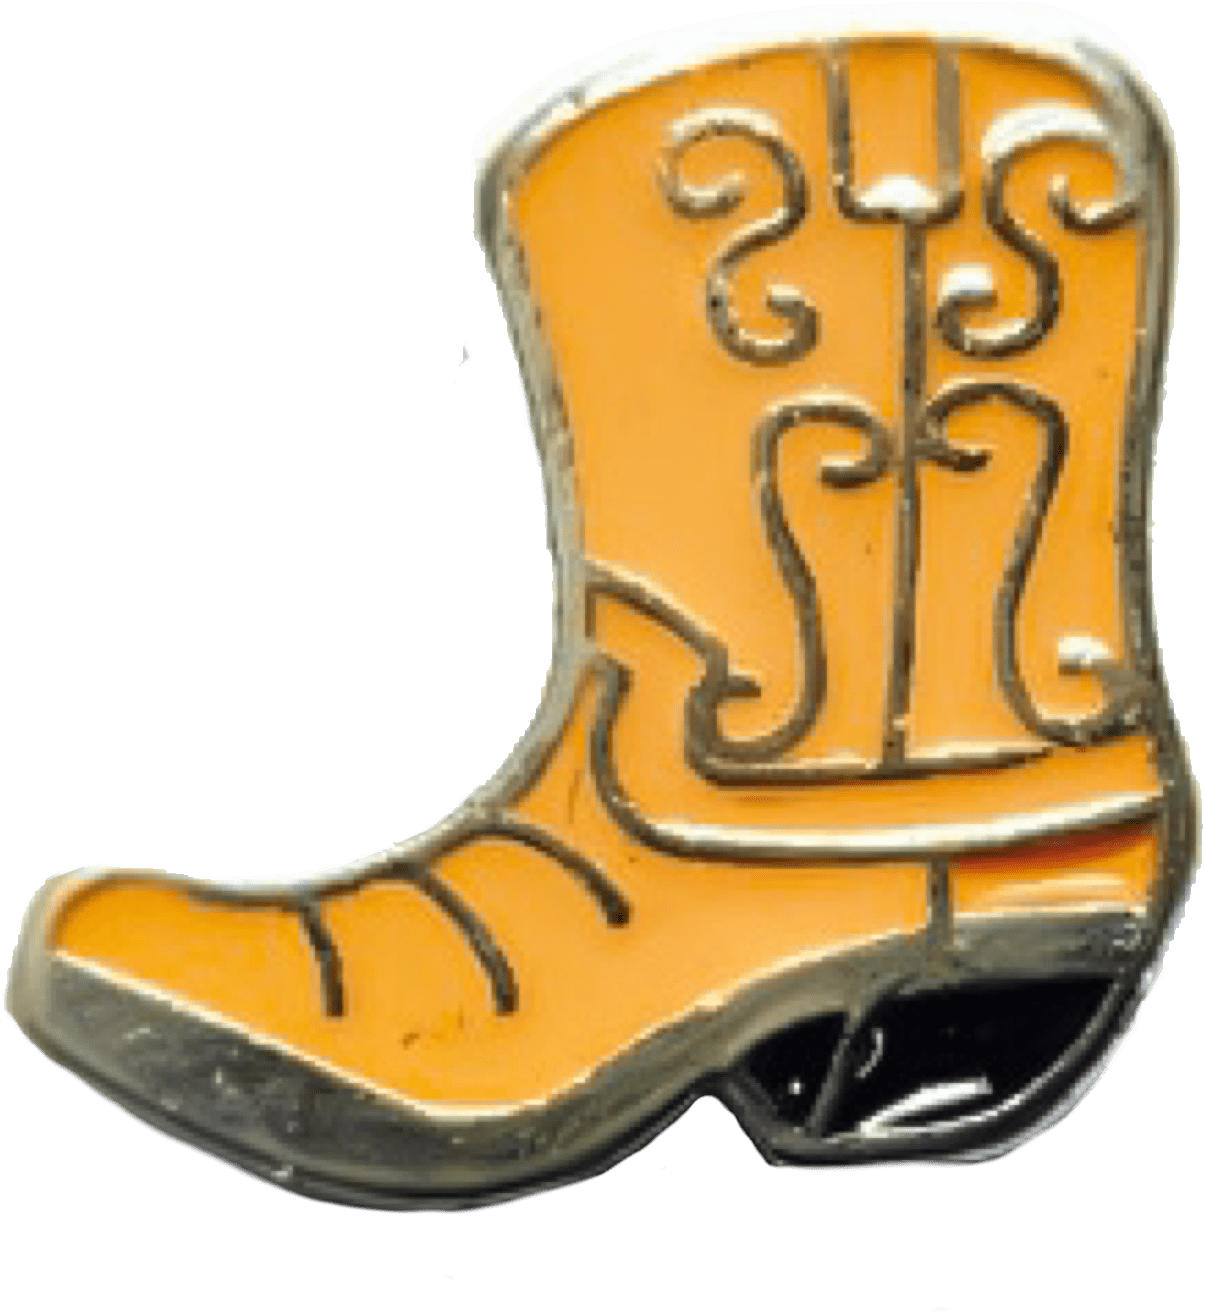 A Yellow Boot Pin On A Black Background